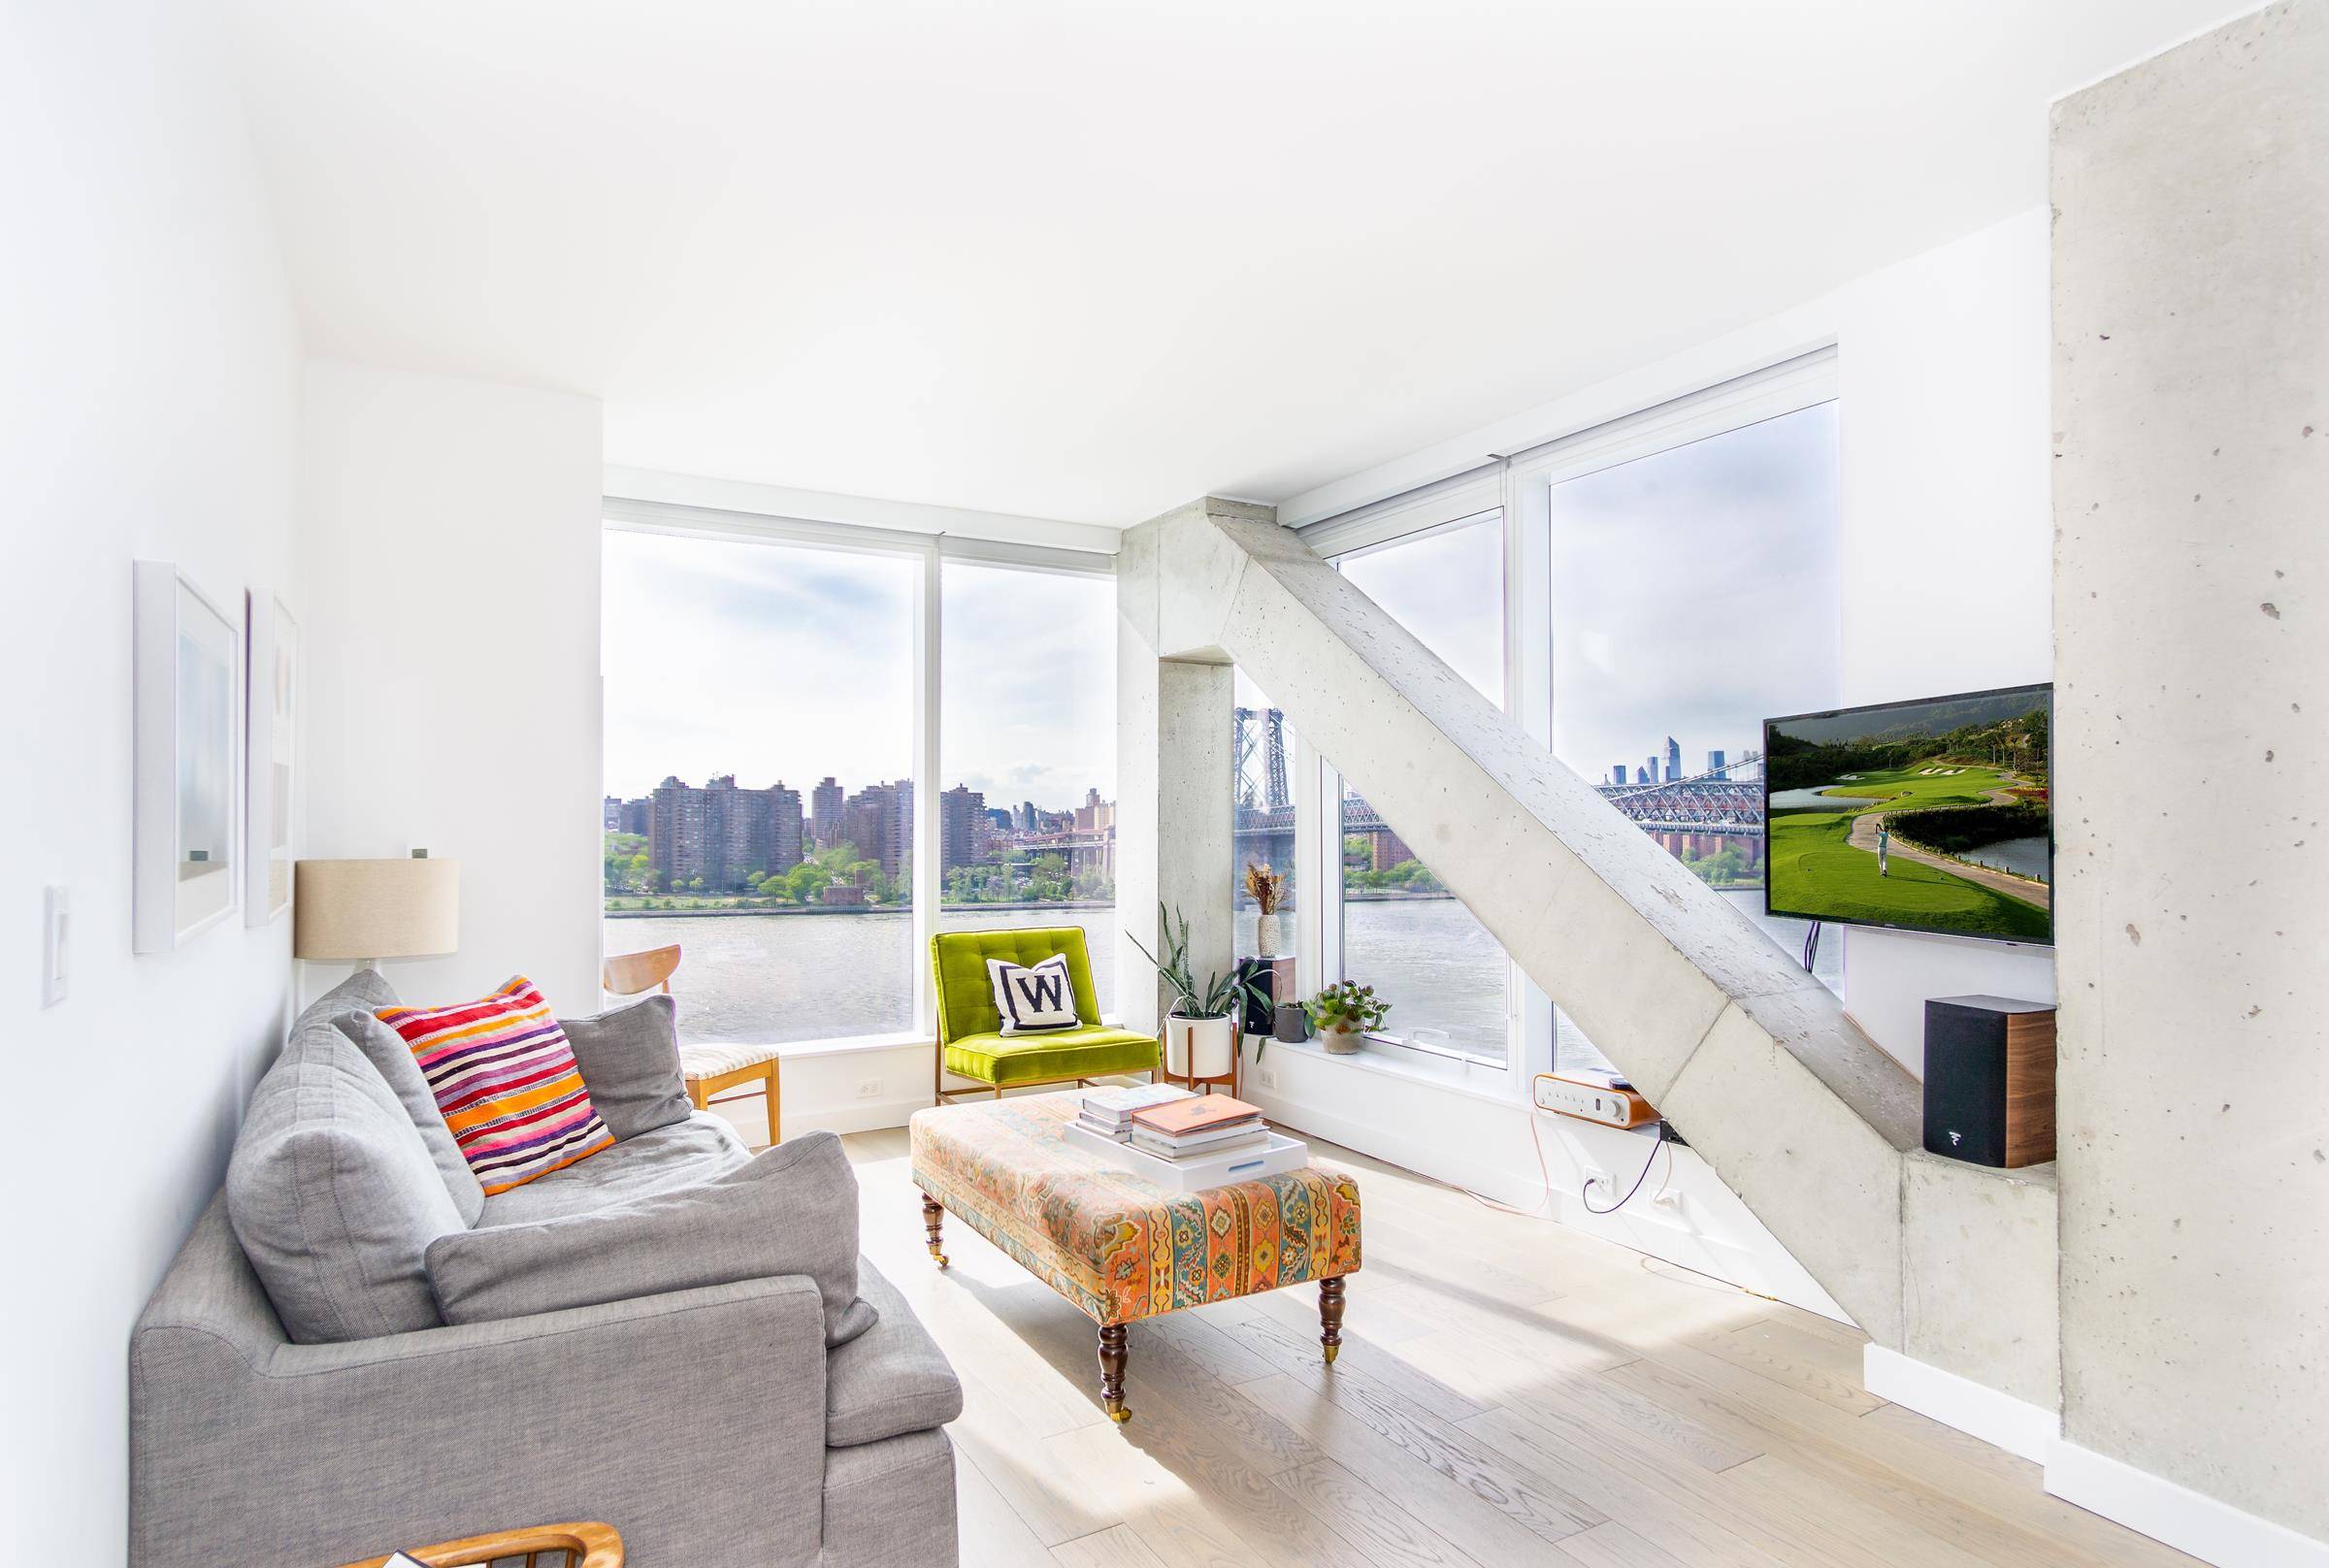 Lease Assignment on an absolutely INCREDIBLE 2 Bedroom 2 Bath unit in one of Williamsburg's most desired buildings !